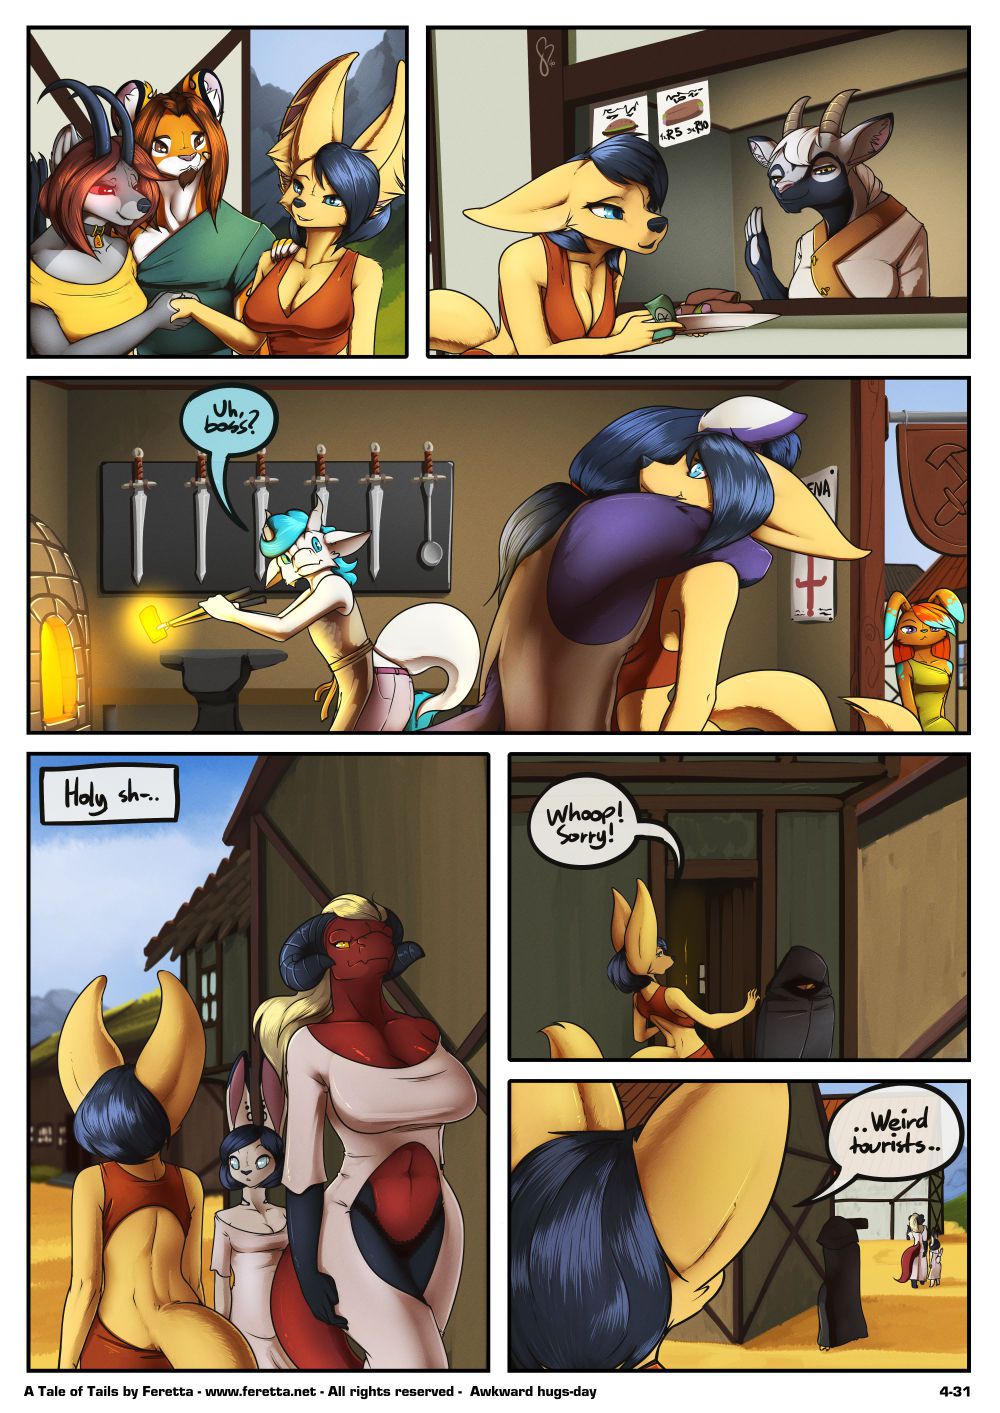 [Feretta] A Tale of Tails: Chapter 4 -  Matters of the mind [Ongoing] 31